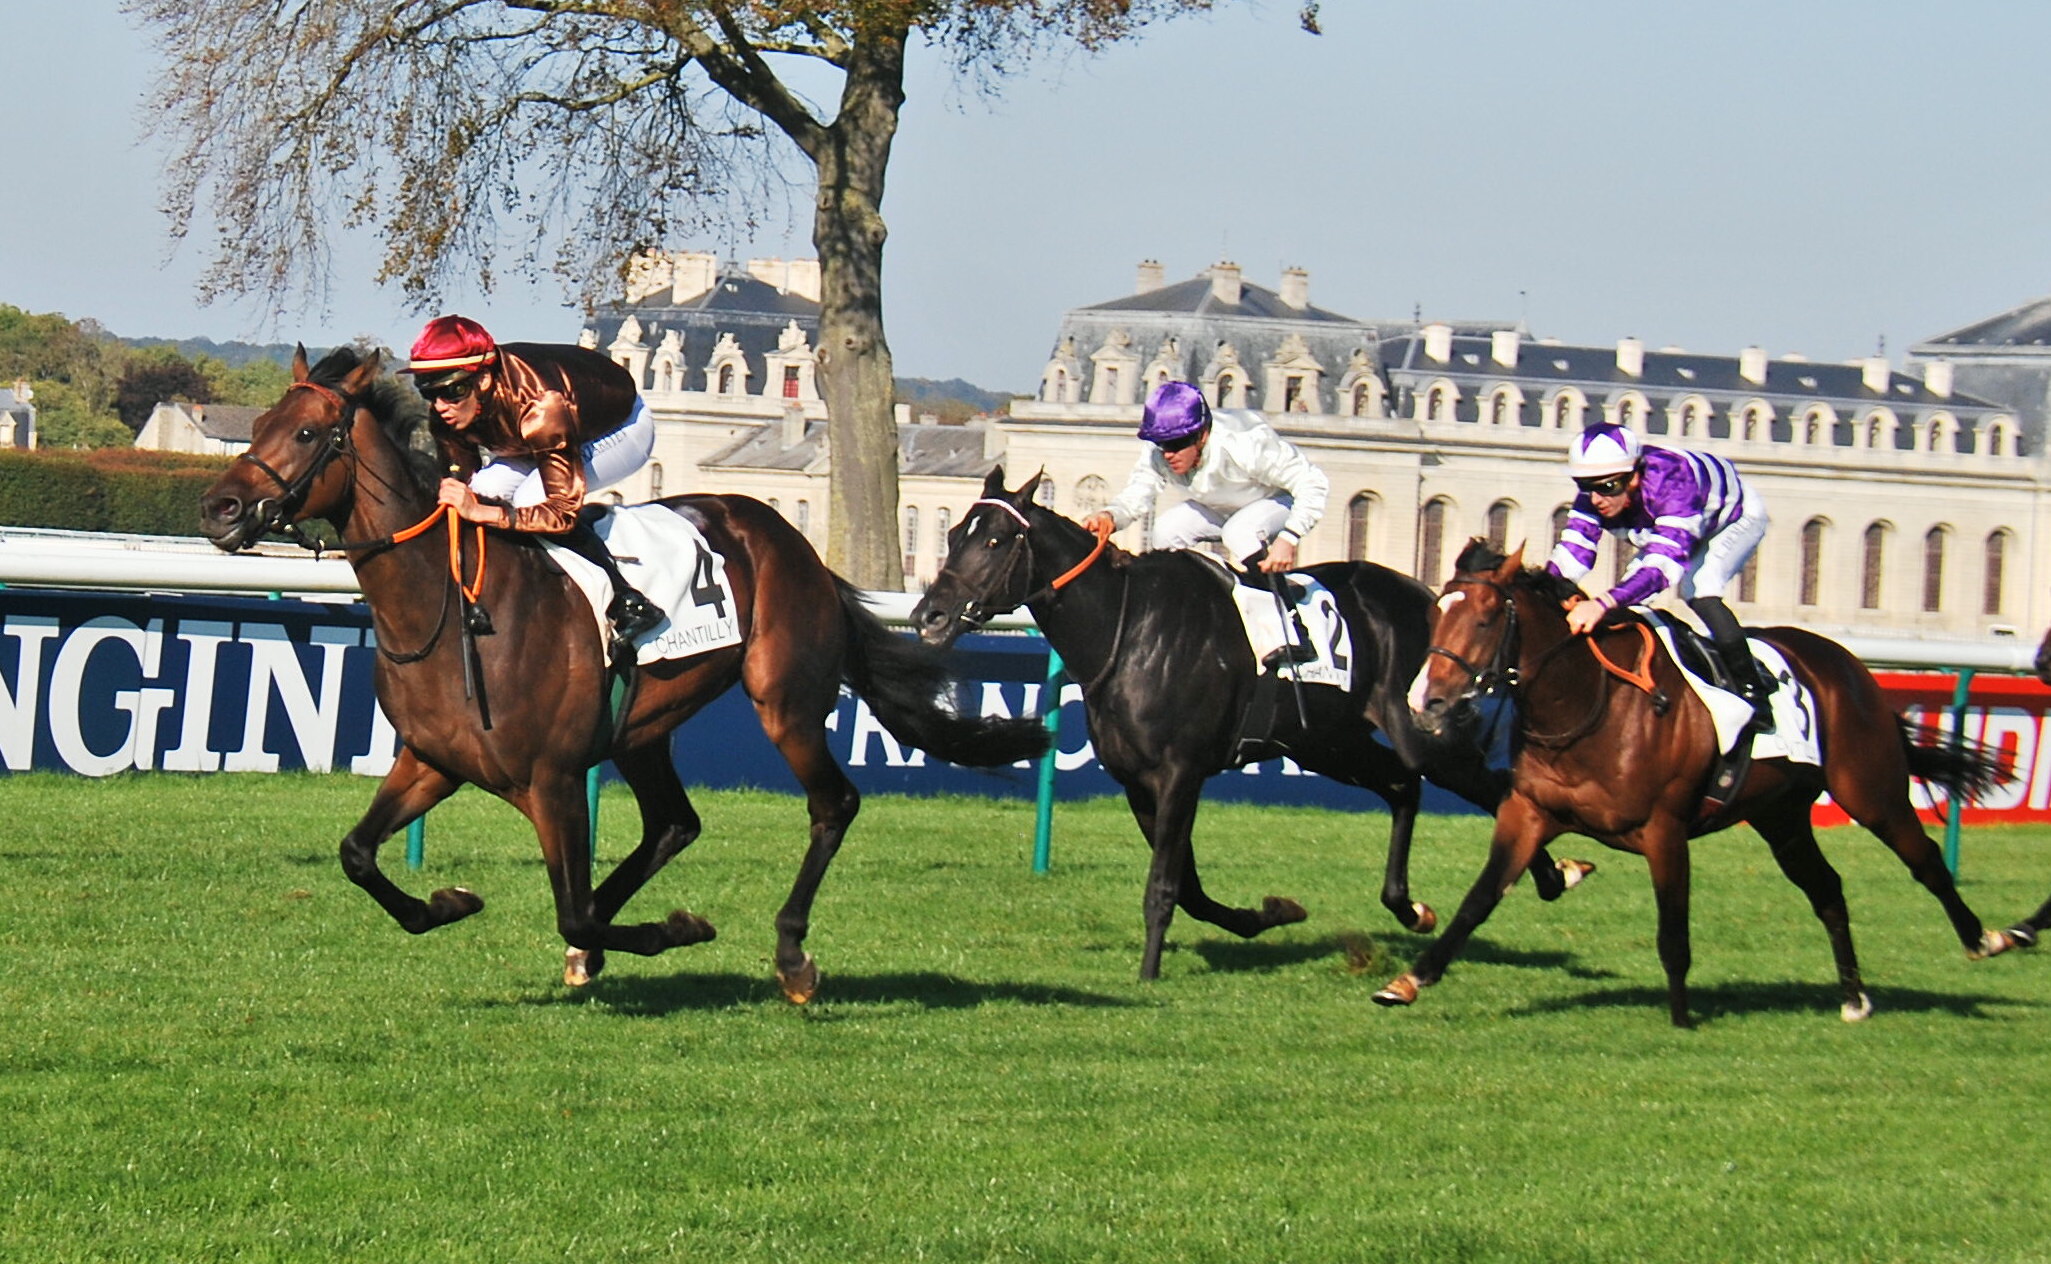 Stylish: Bauyrzhan Murzabayev winning the listed Prix Le Fabuleux on Lord Charming (left) at Chantilly in October. Photo: John Gilmore